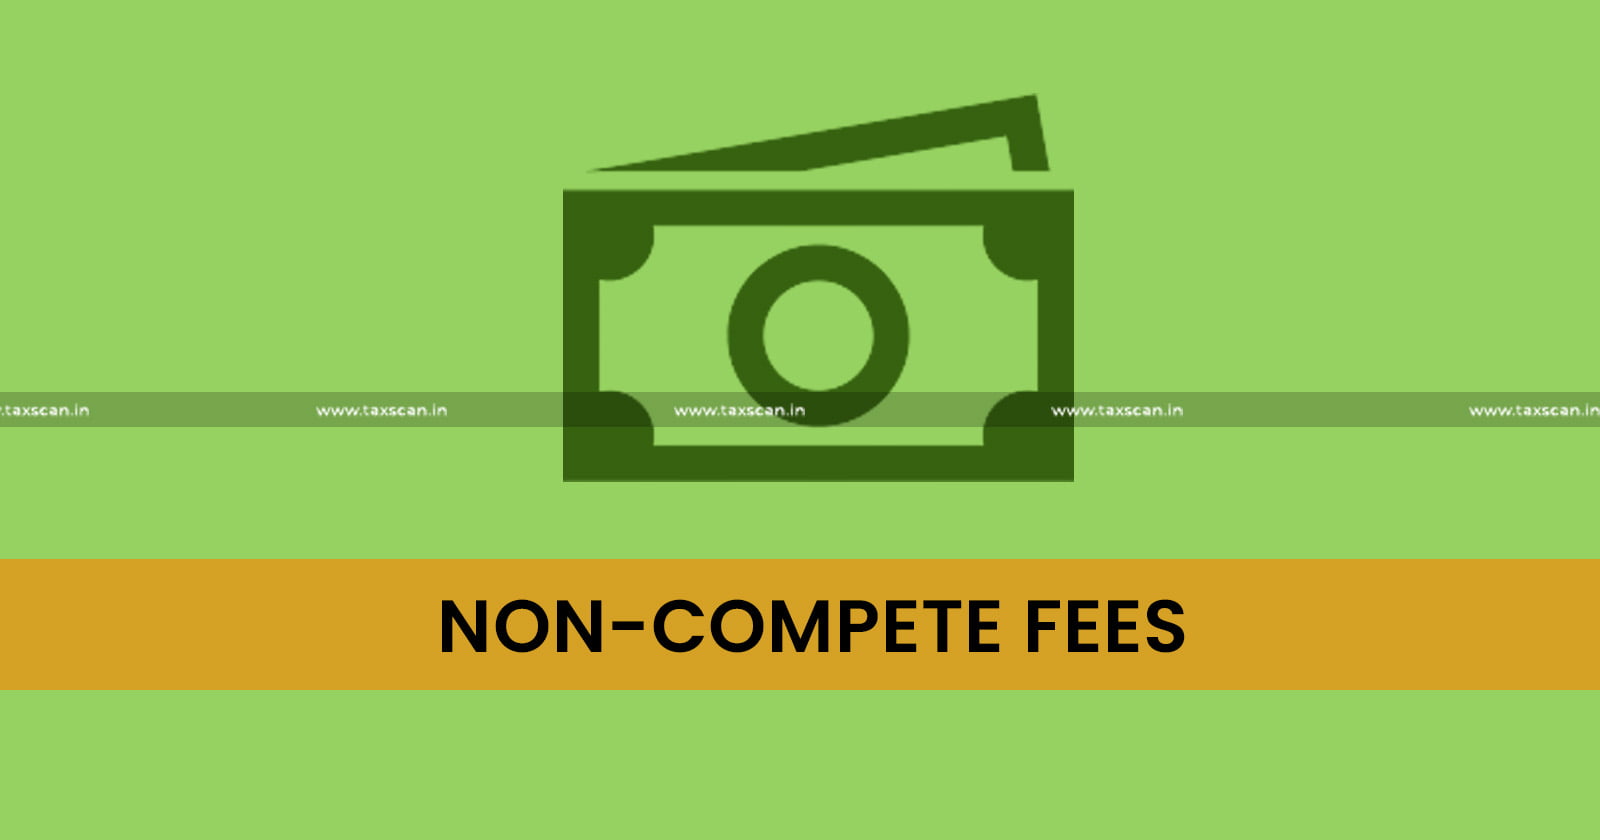 Non-Competition Fee received - Restrictive Covenants Restrains Source - Income - ITAT - TAXSCAN